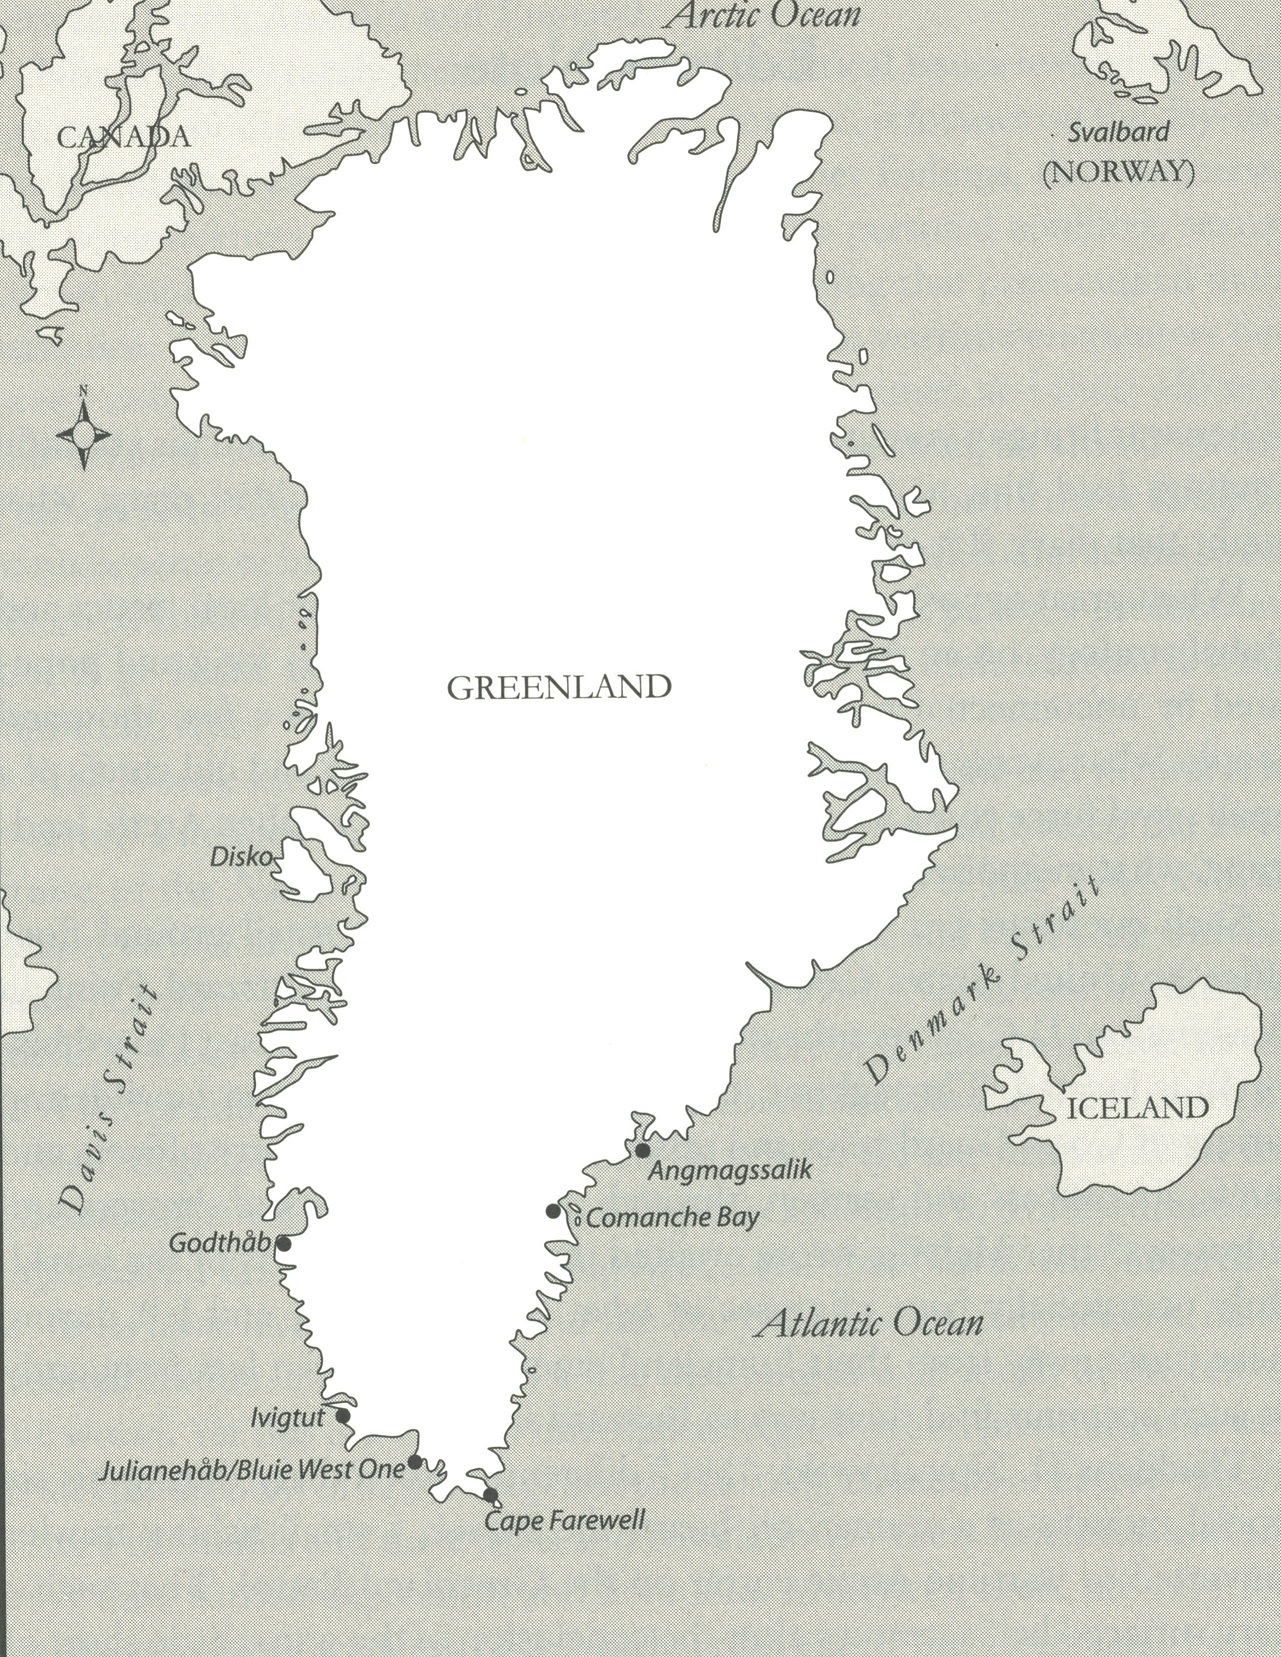 1.	This chart shows the land mass of Greenland, whose coasts were largely icebound during World War II. (From Life and Death on the Greenland Patrol, 1942, by Thaddeus Novak)